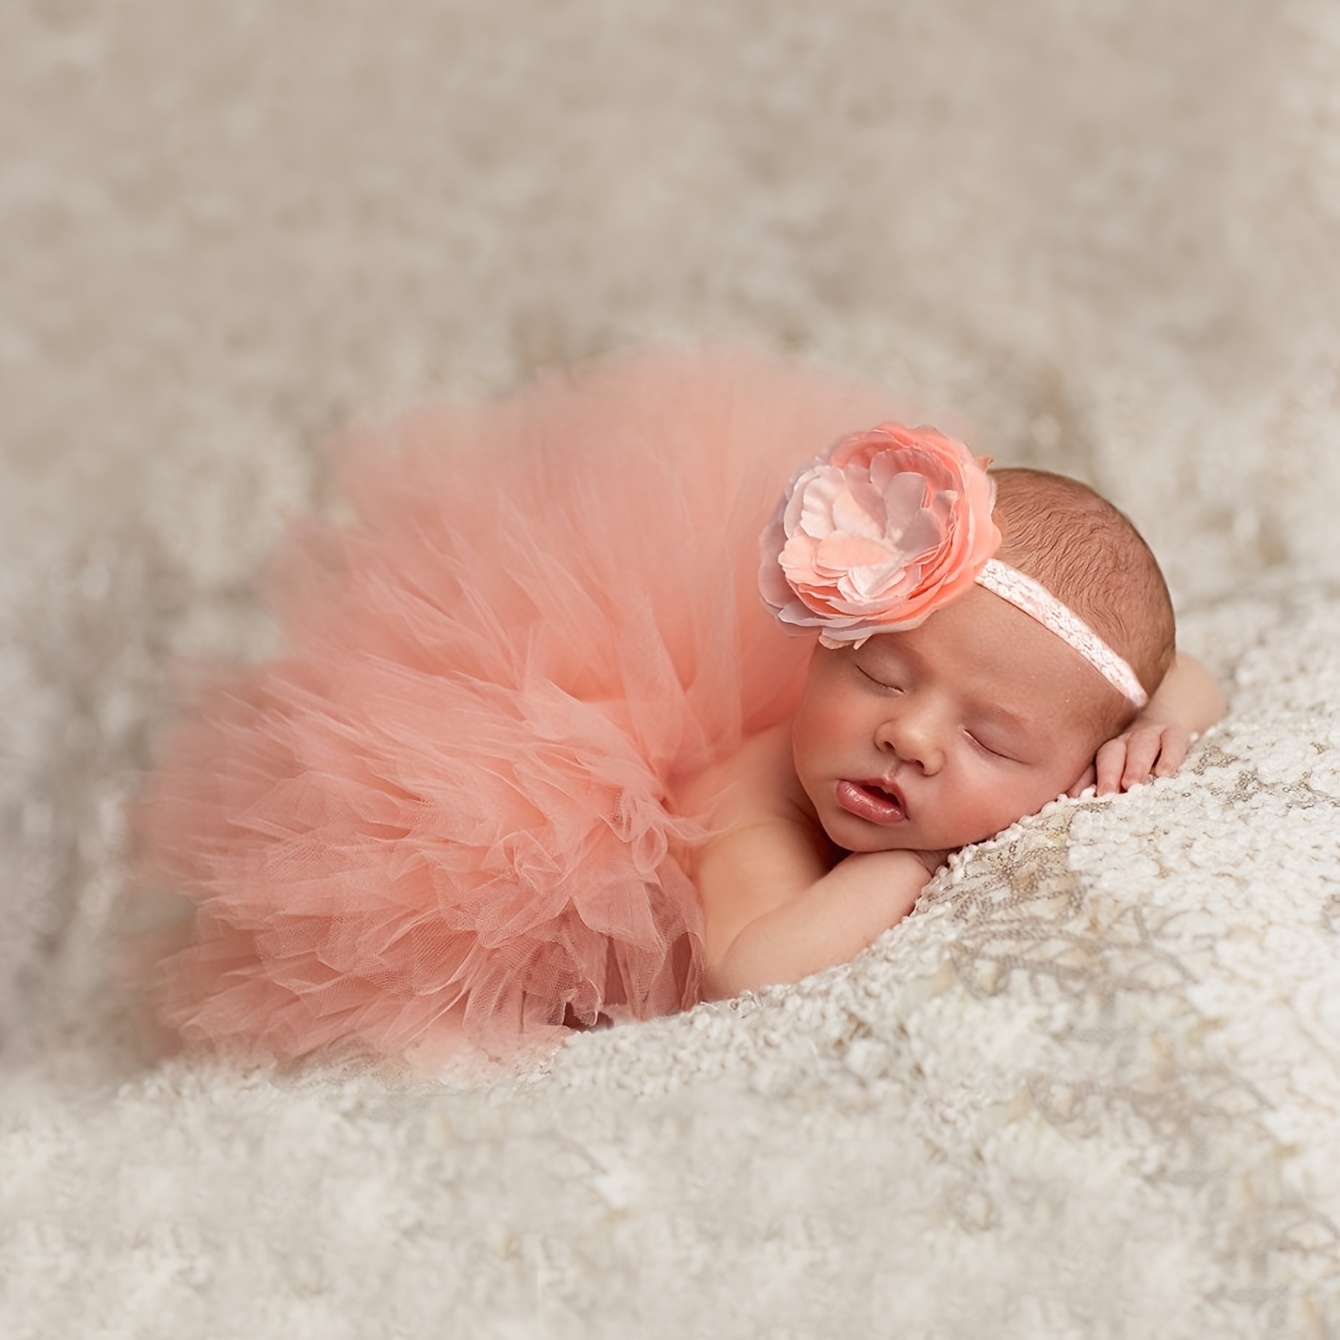 Buy Baby Cute Photography Tutu Skirts With One Headpiece